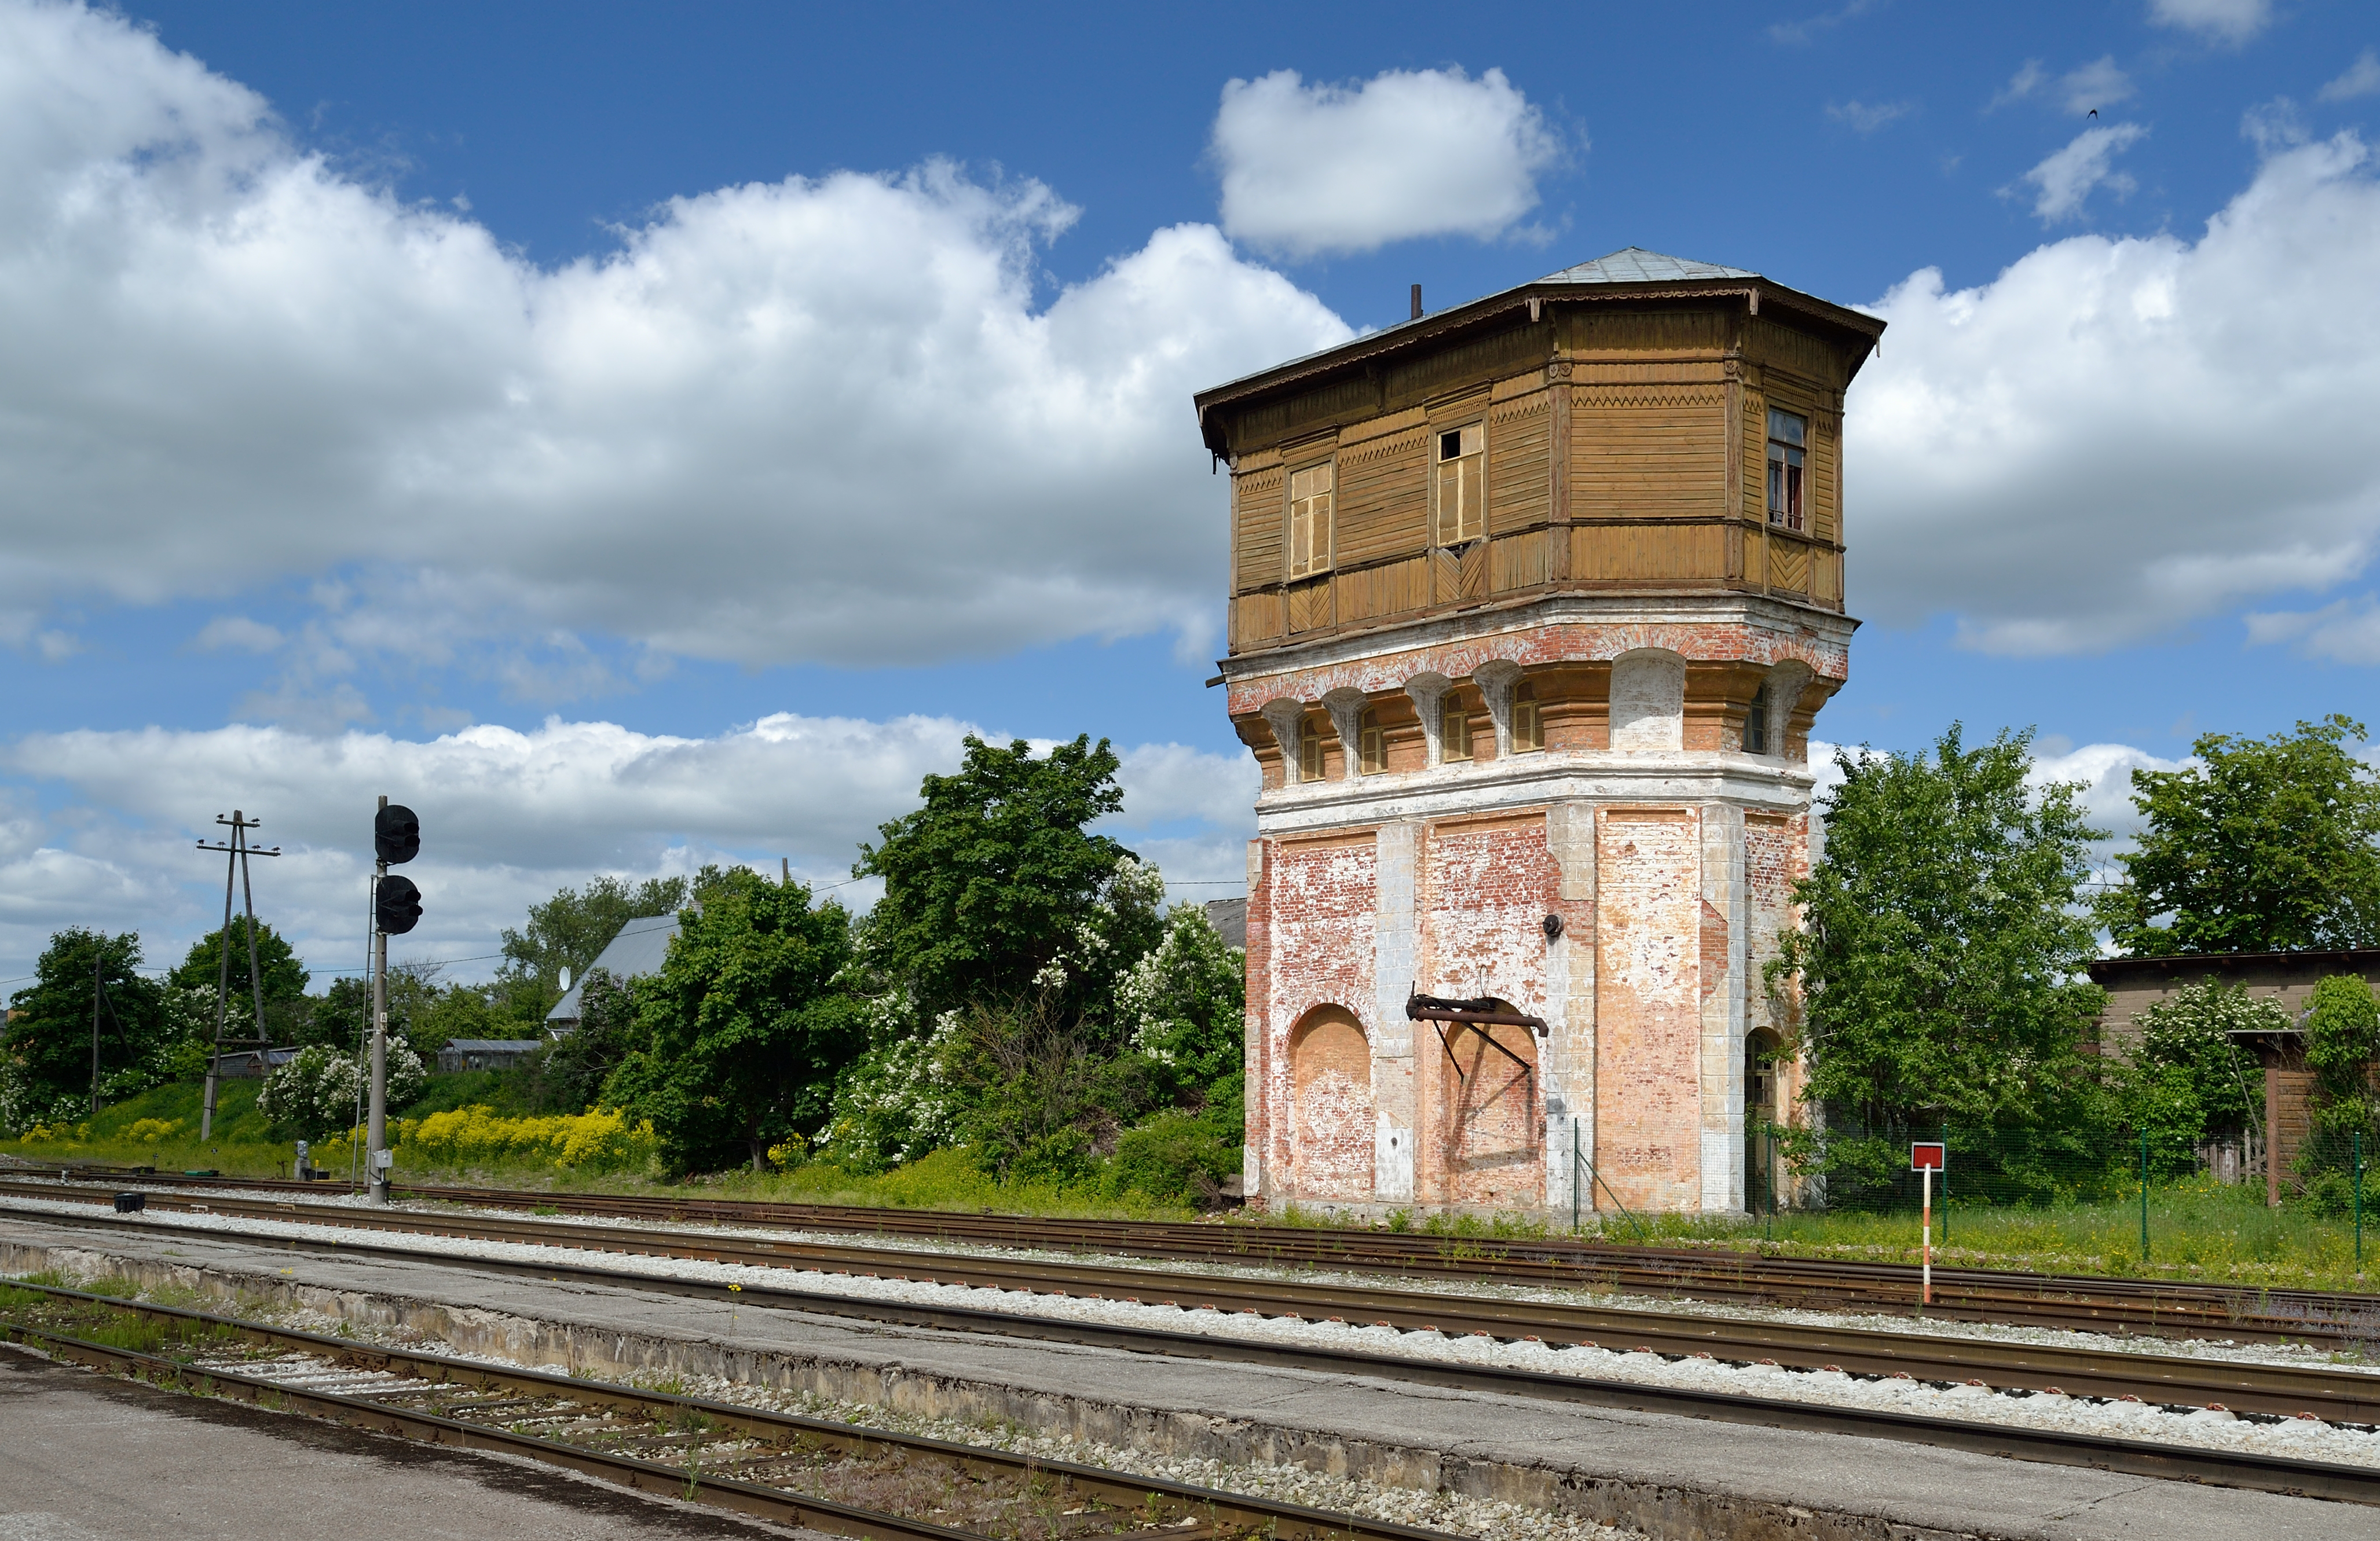 Water Tower at Rakvere Station